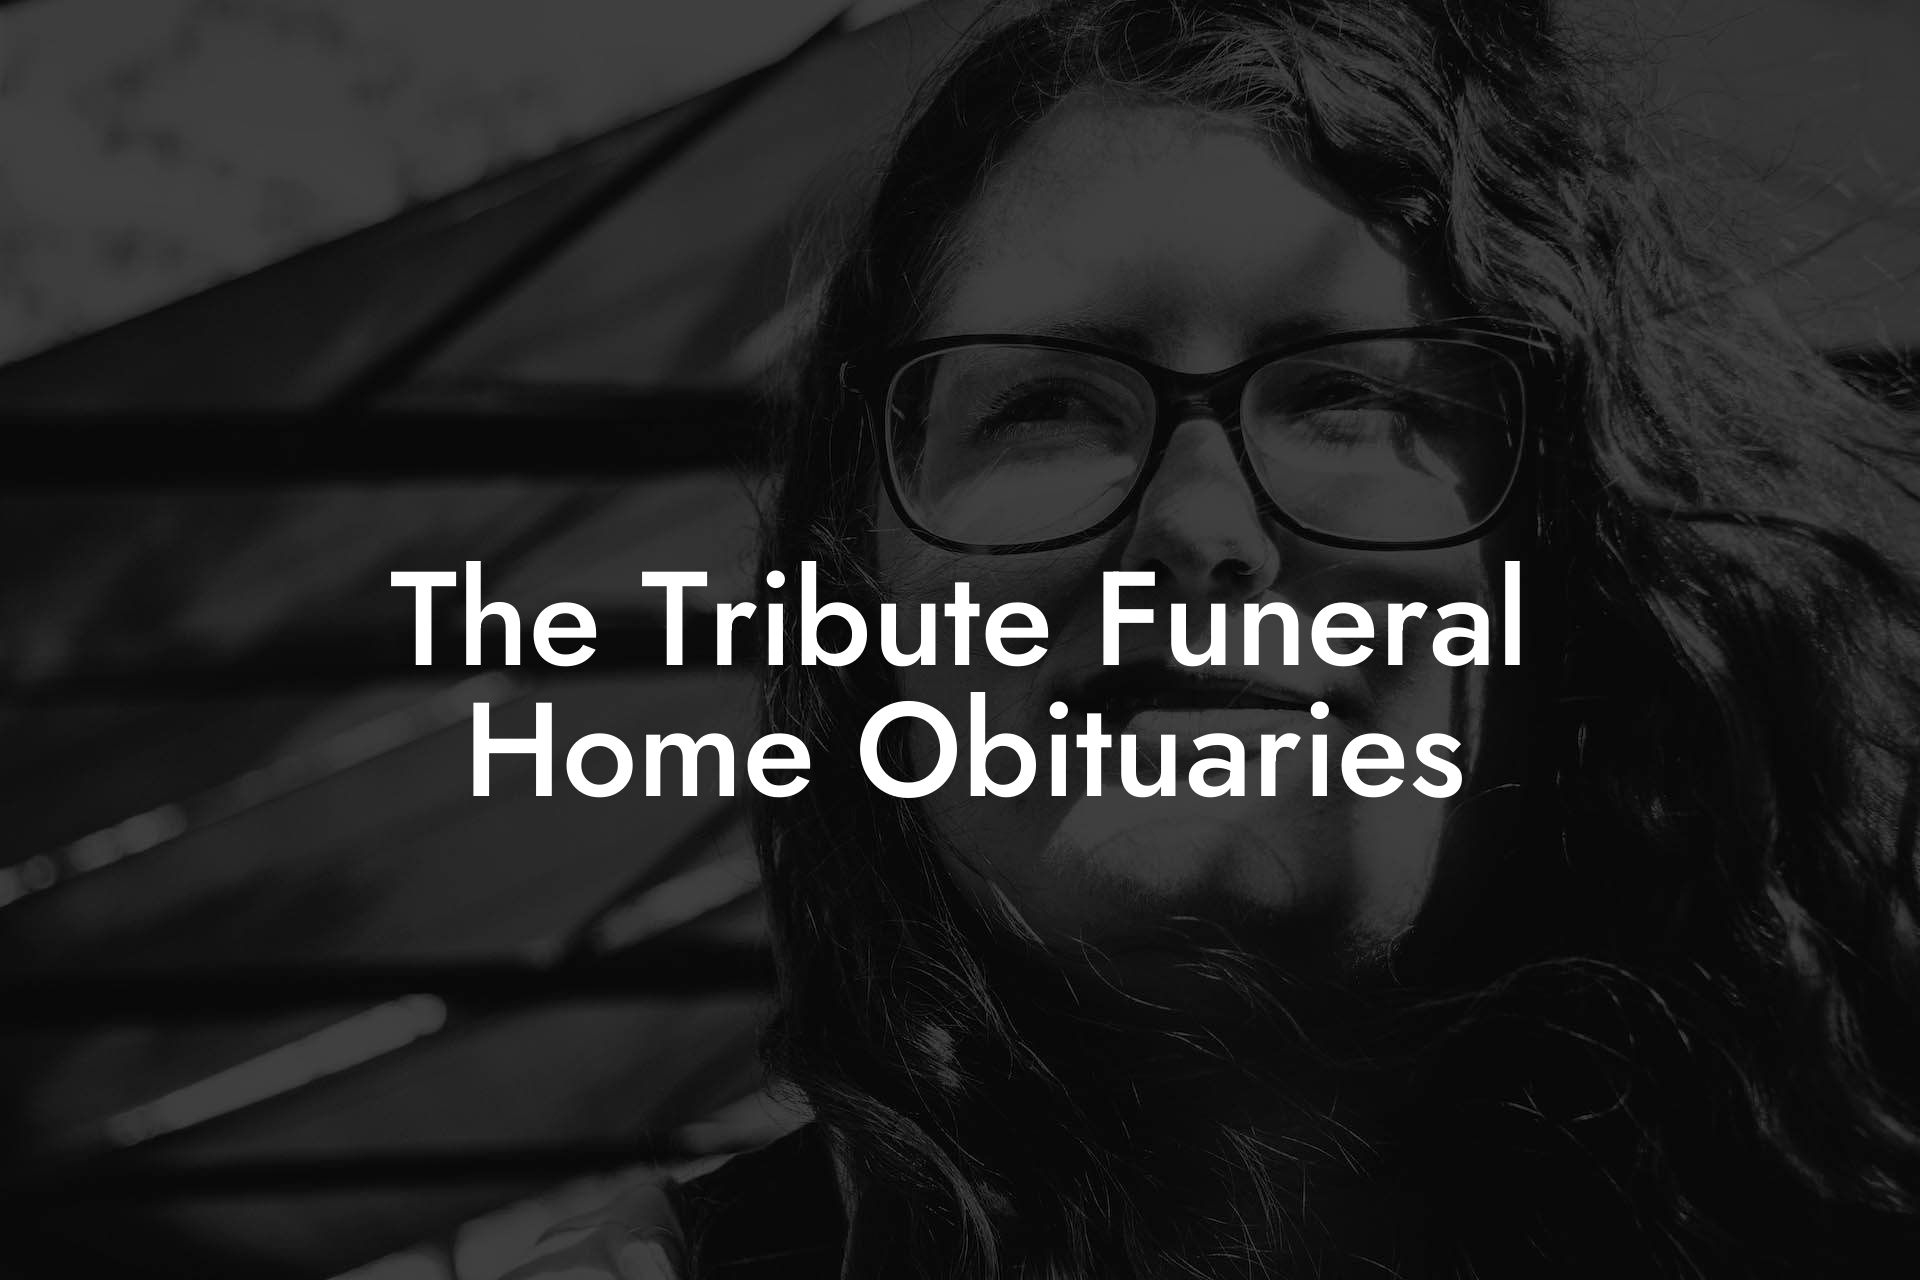 The Tribute Funeral Home Obituaries